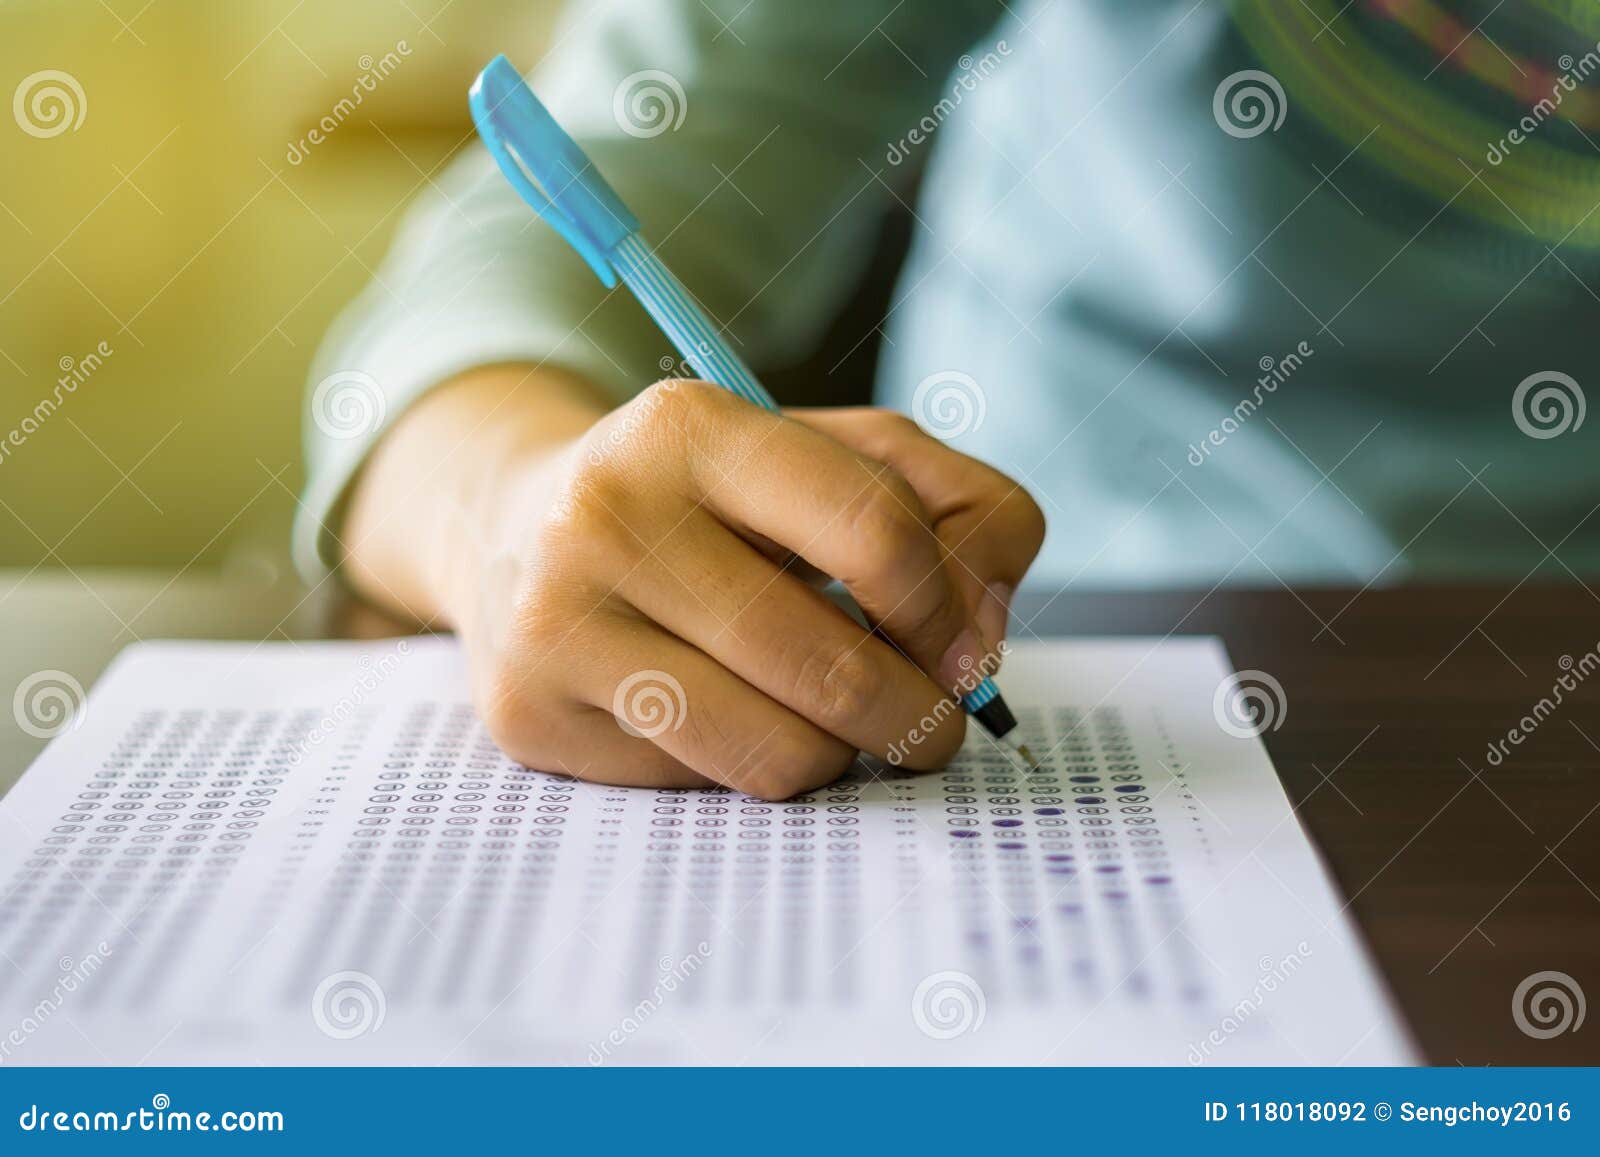 close up of high school or university student holding a pen writing on answer sheet paper in examination room. college students an